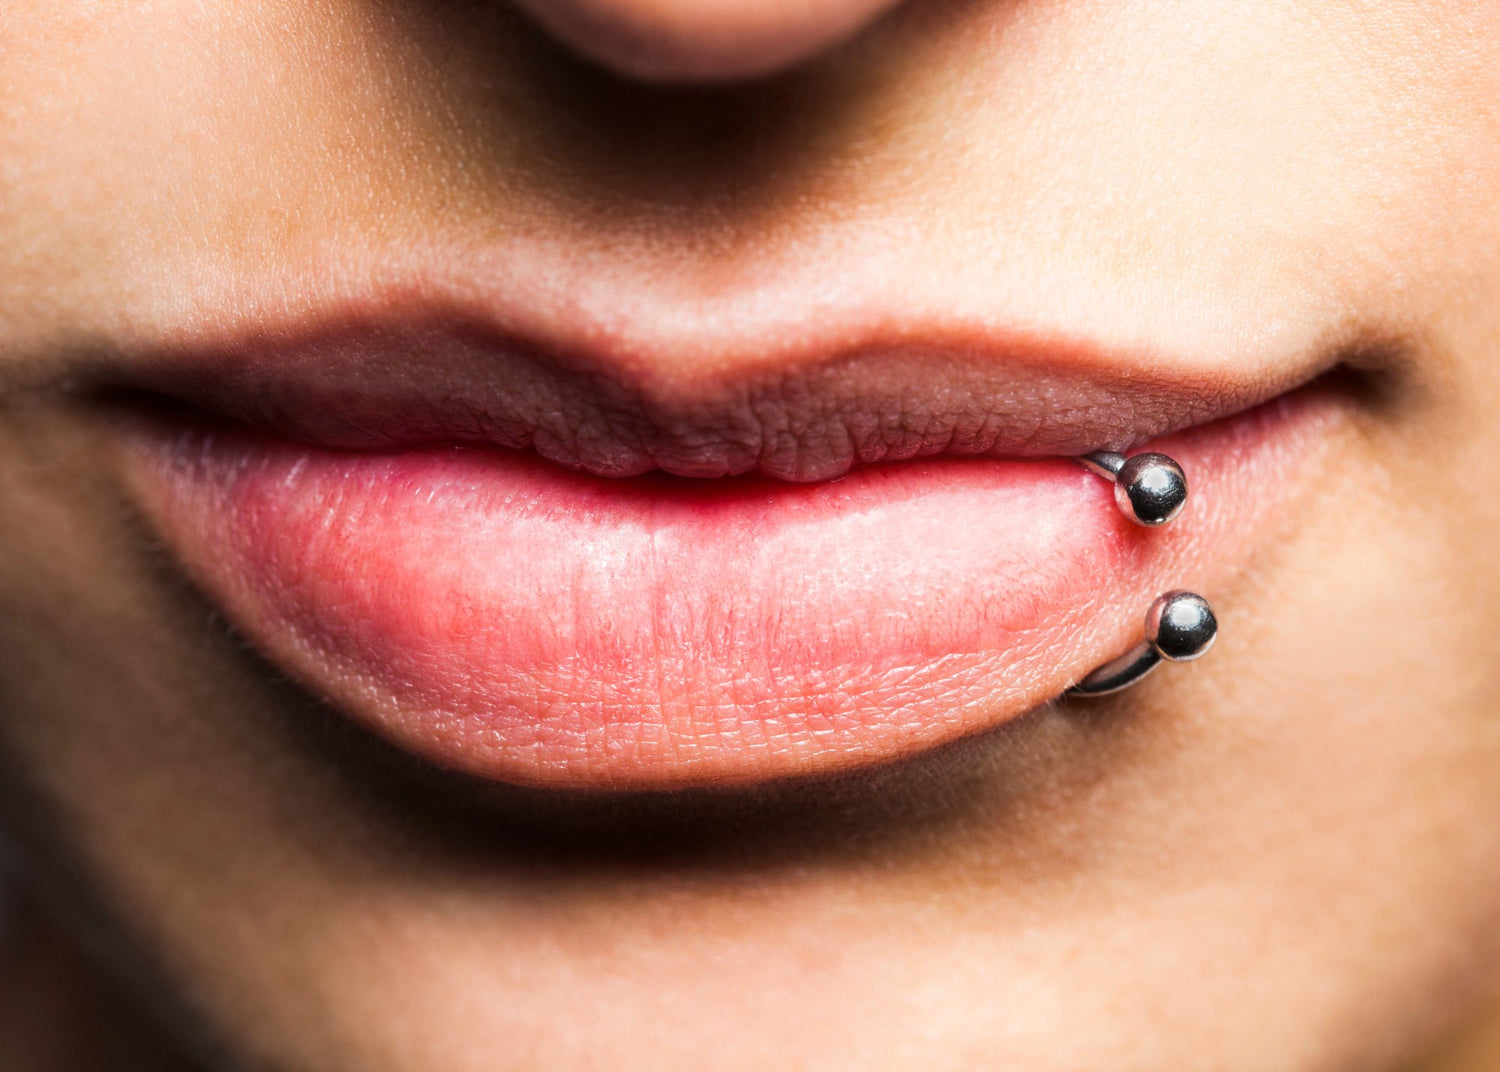 Risks and Impacts of Oral Piercings on Dental Health - MySmile